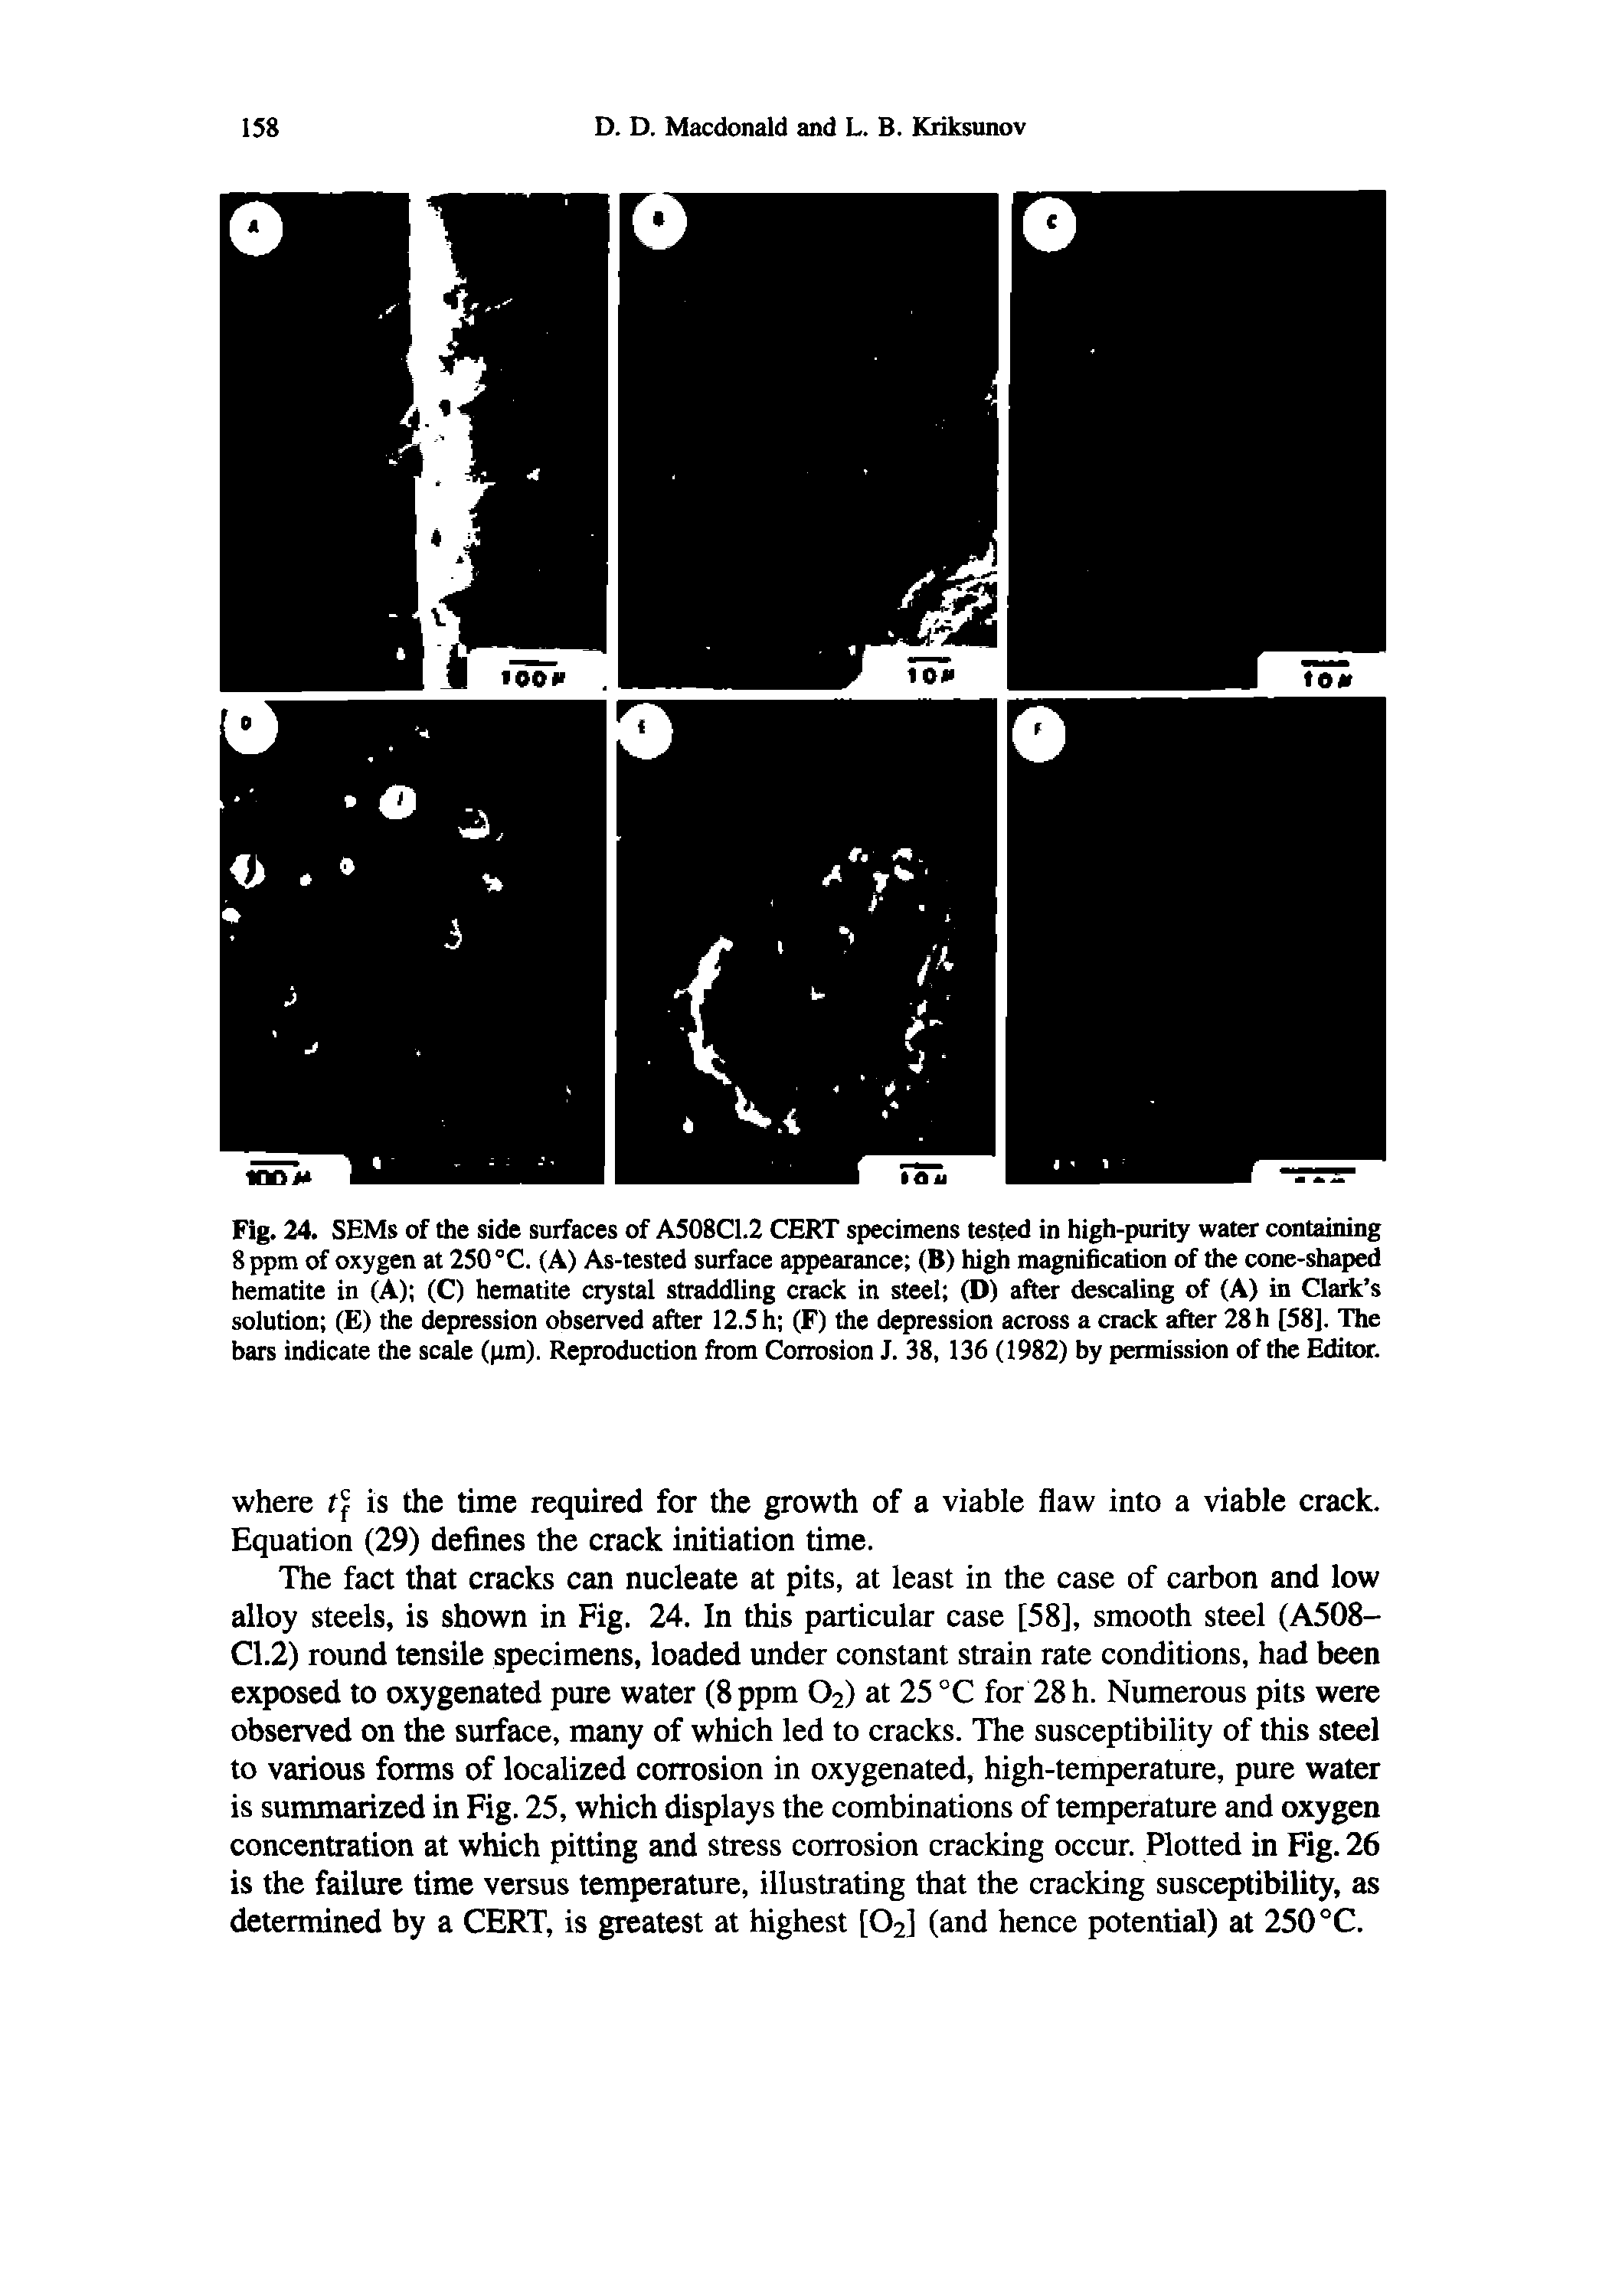 Fig. 24. SEMs of the side surfaces of A508C1.2 CERT specimens tested in high-purity water containing 8 ppm of oxygen at 250 °C. (A) As-tested surface appearance (B) high magnification of the cone-shaped hematite in (A) (C) hematite crystal straddling crack in steel (D) after descaling of (A) in Clark s solution (E) the depression observed after 12.5 h (F) the depression across a crack after 28 h [58], The bars indicate the scde (pm). Reproduction firam Corrosion J. 38, 136 (1982) by permission of the Editor.